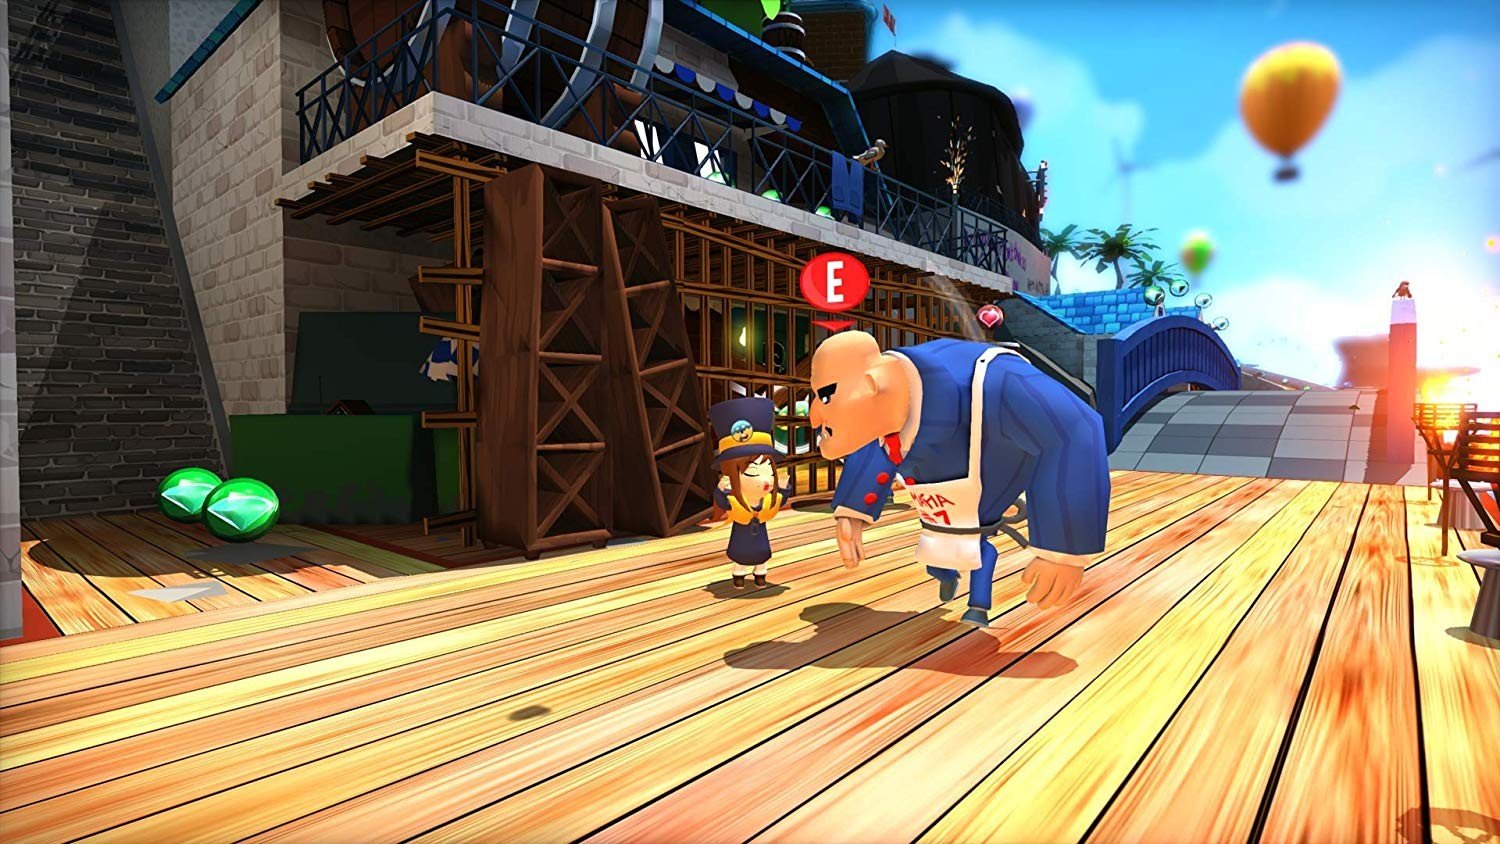 A Hat in Time, Nintendo Switch, Switch, release date, gameplay, features, price, pre-order, US, Humble Bundle, trailer, North America